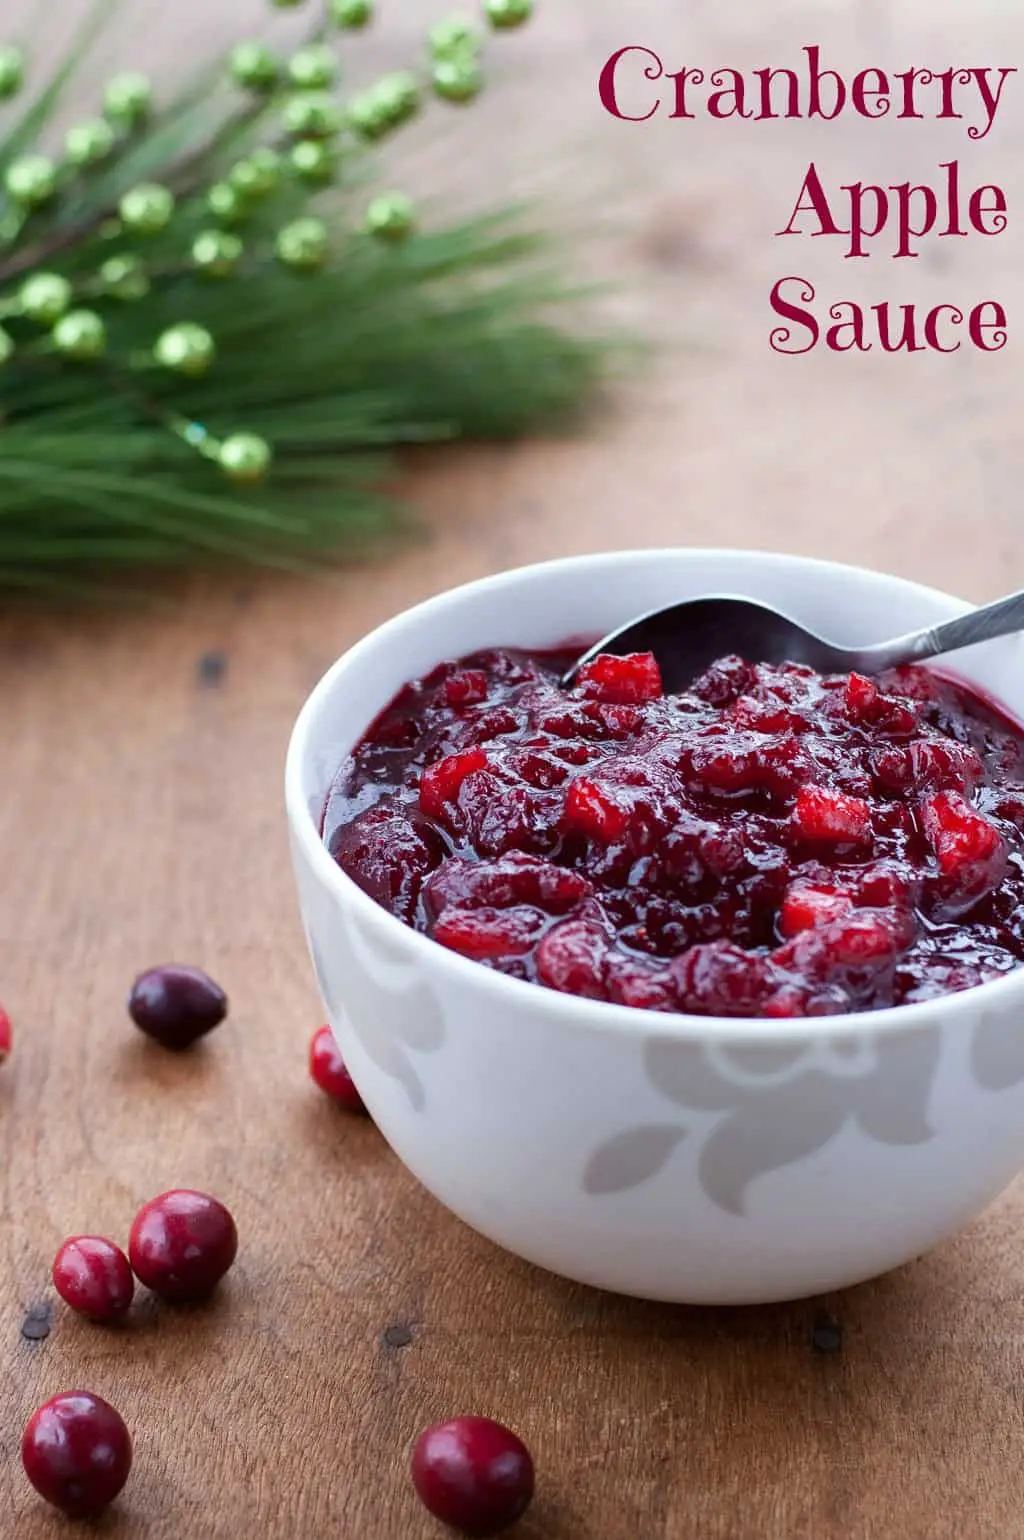 White bowl filled with chunky homemade cranberry sauce with some cranberries, pine needles and holiday decorations in the background